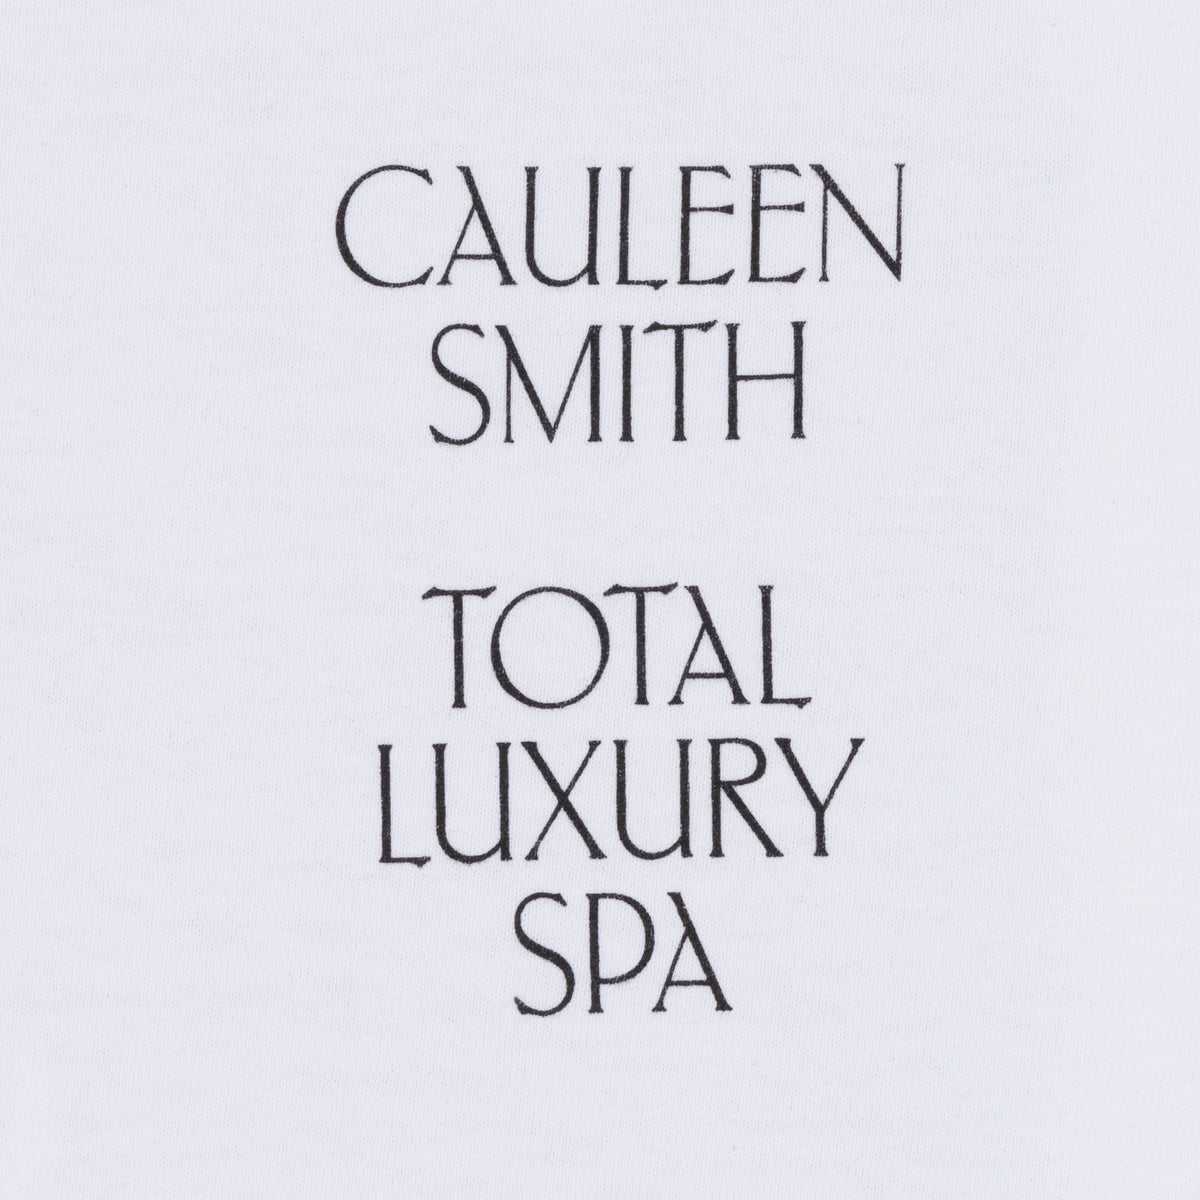 CAULEEN SMITH x TOTAL LUXURY SPA - I, WHO HAVE NOTHING - L/S TEE